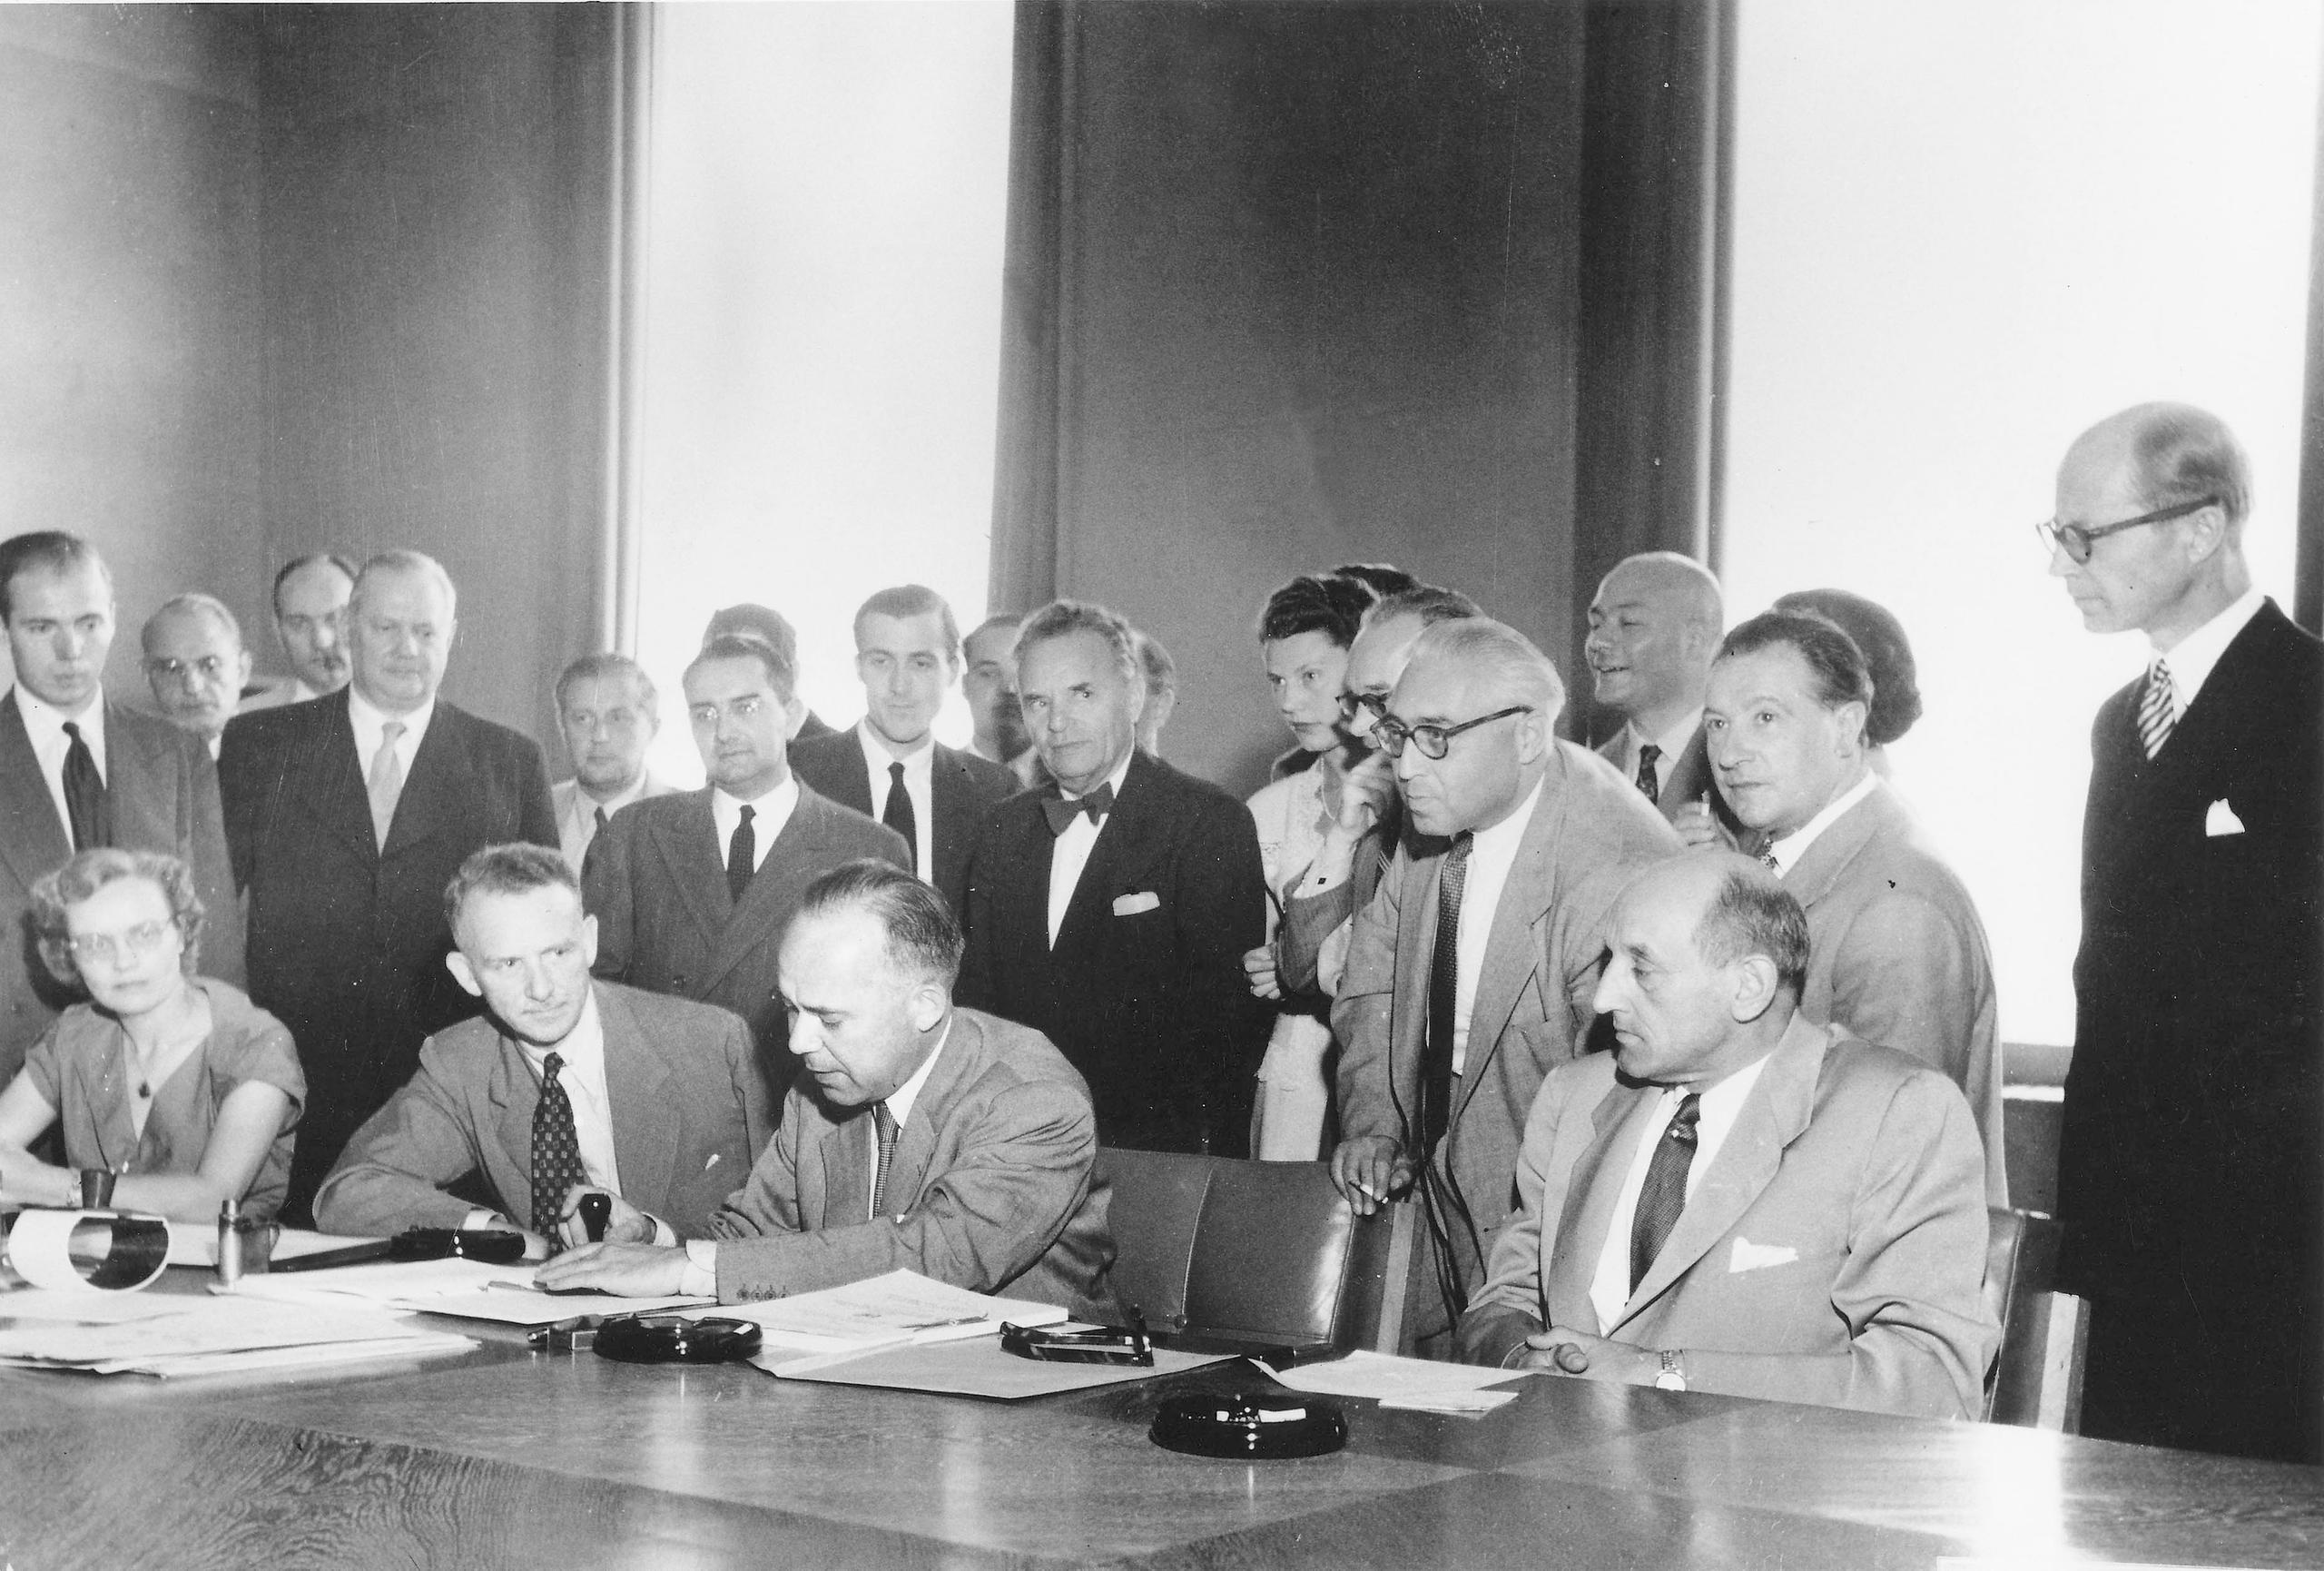 The UN Refugee Convention was signed in Geneva in 1951.